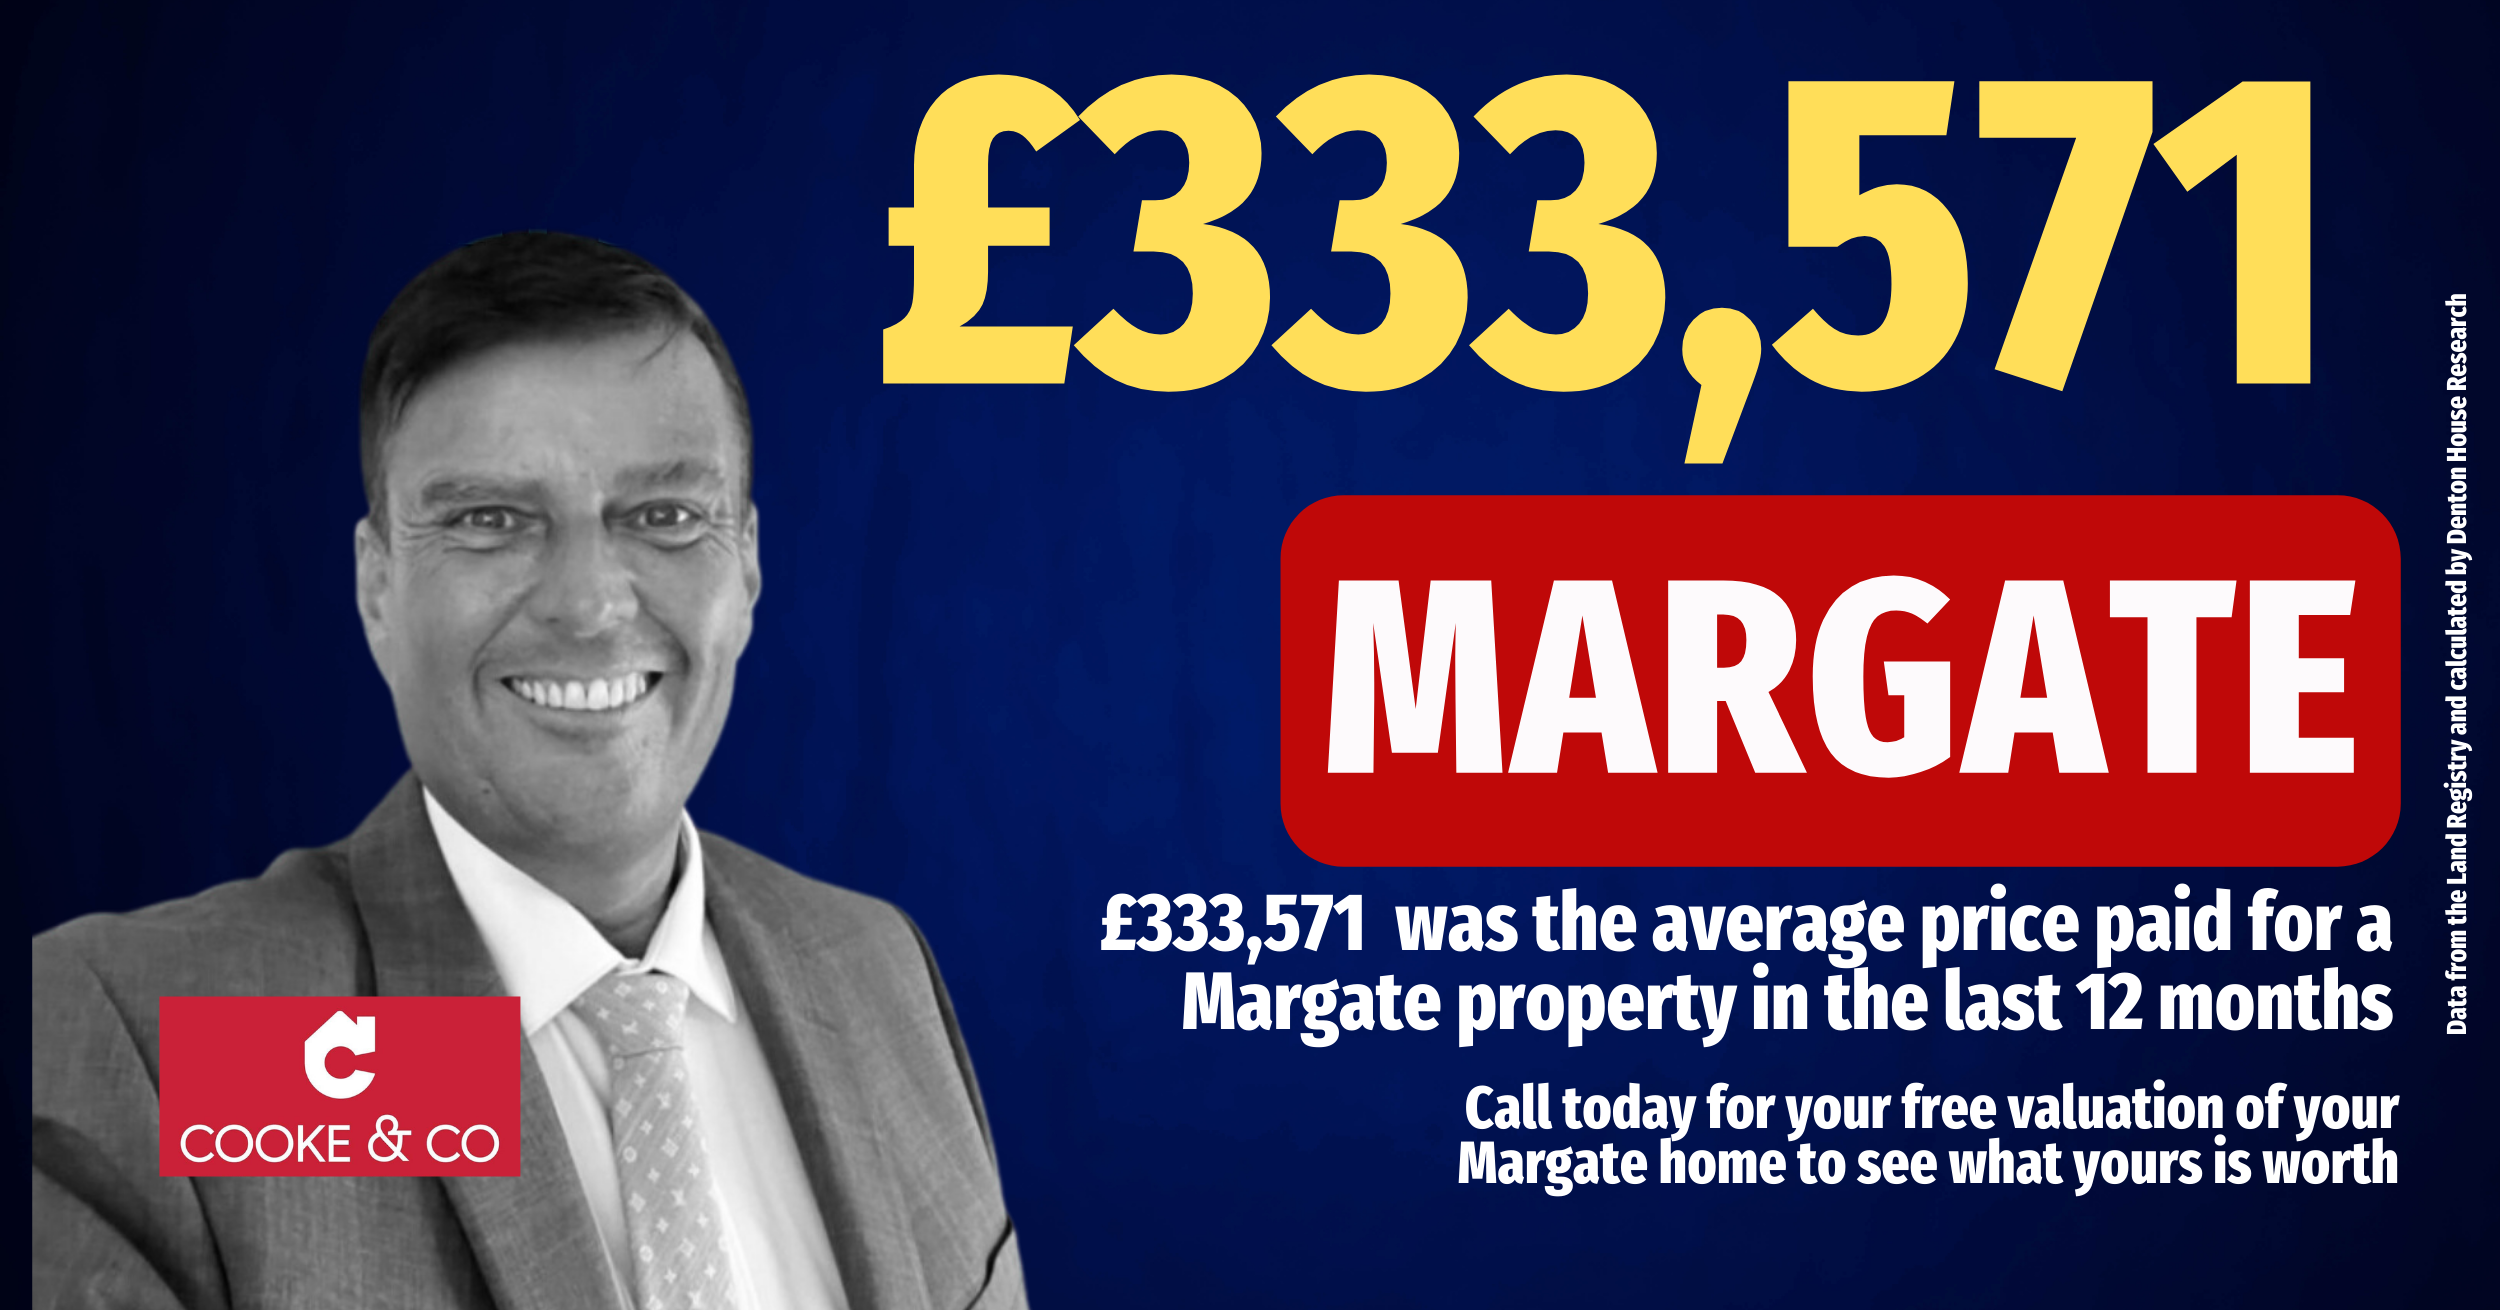 Margate 12 moth average house price 2023 to 2024 